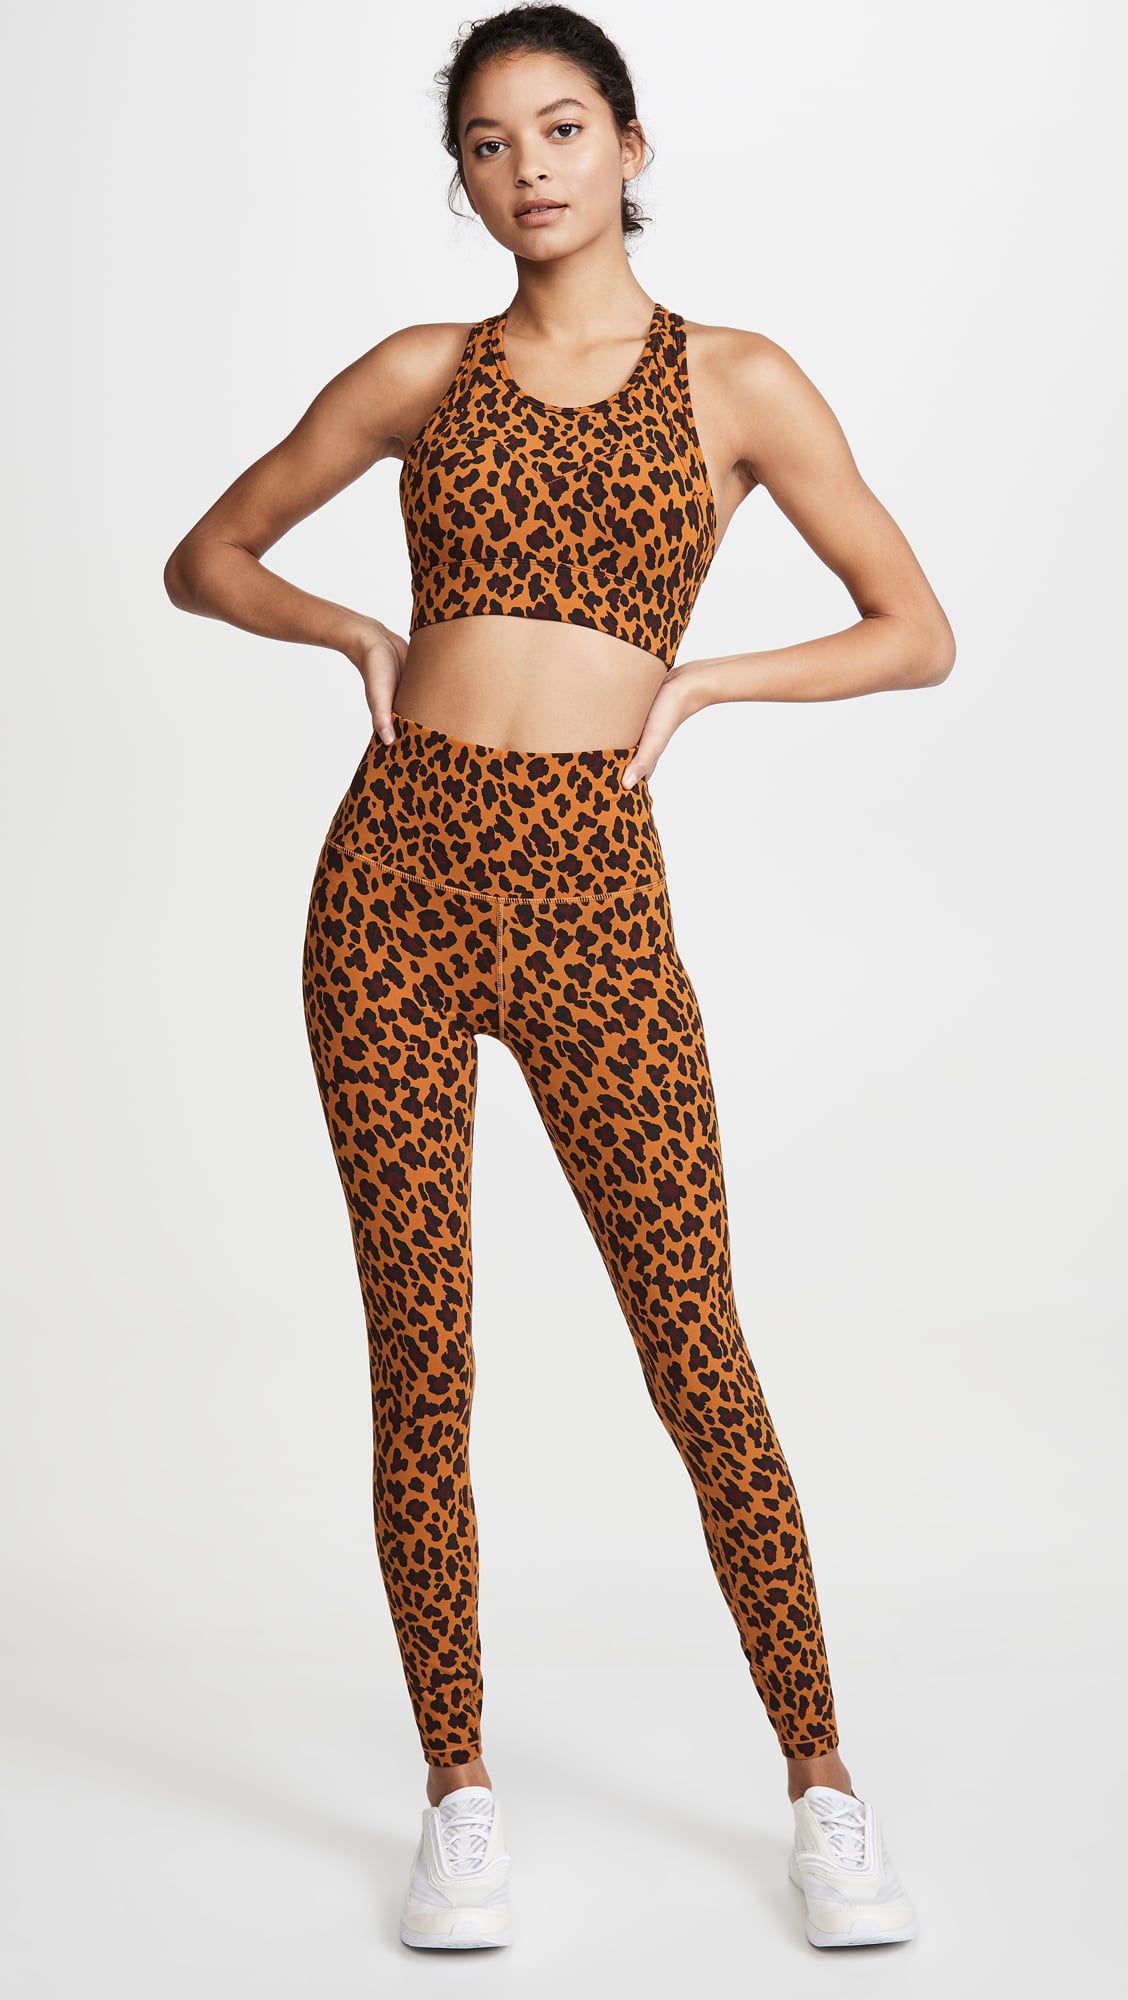 Where to buy animal print leggings and activewear: Best athleisure